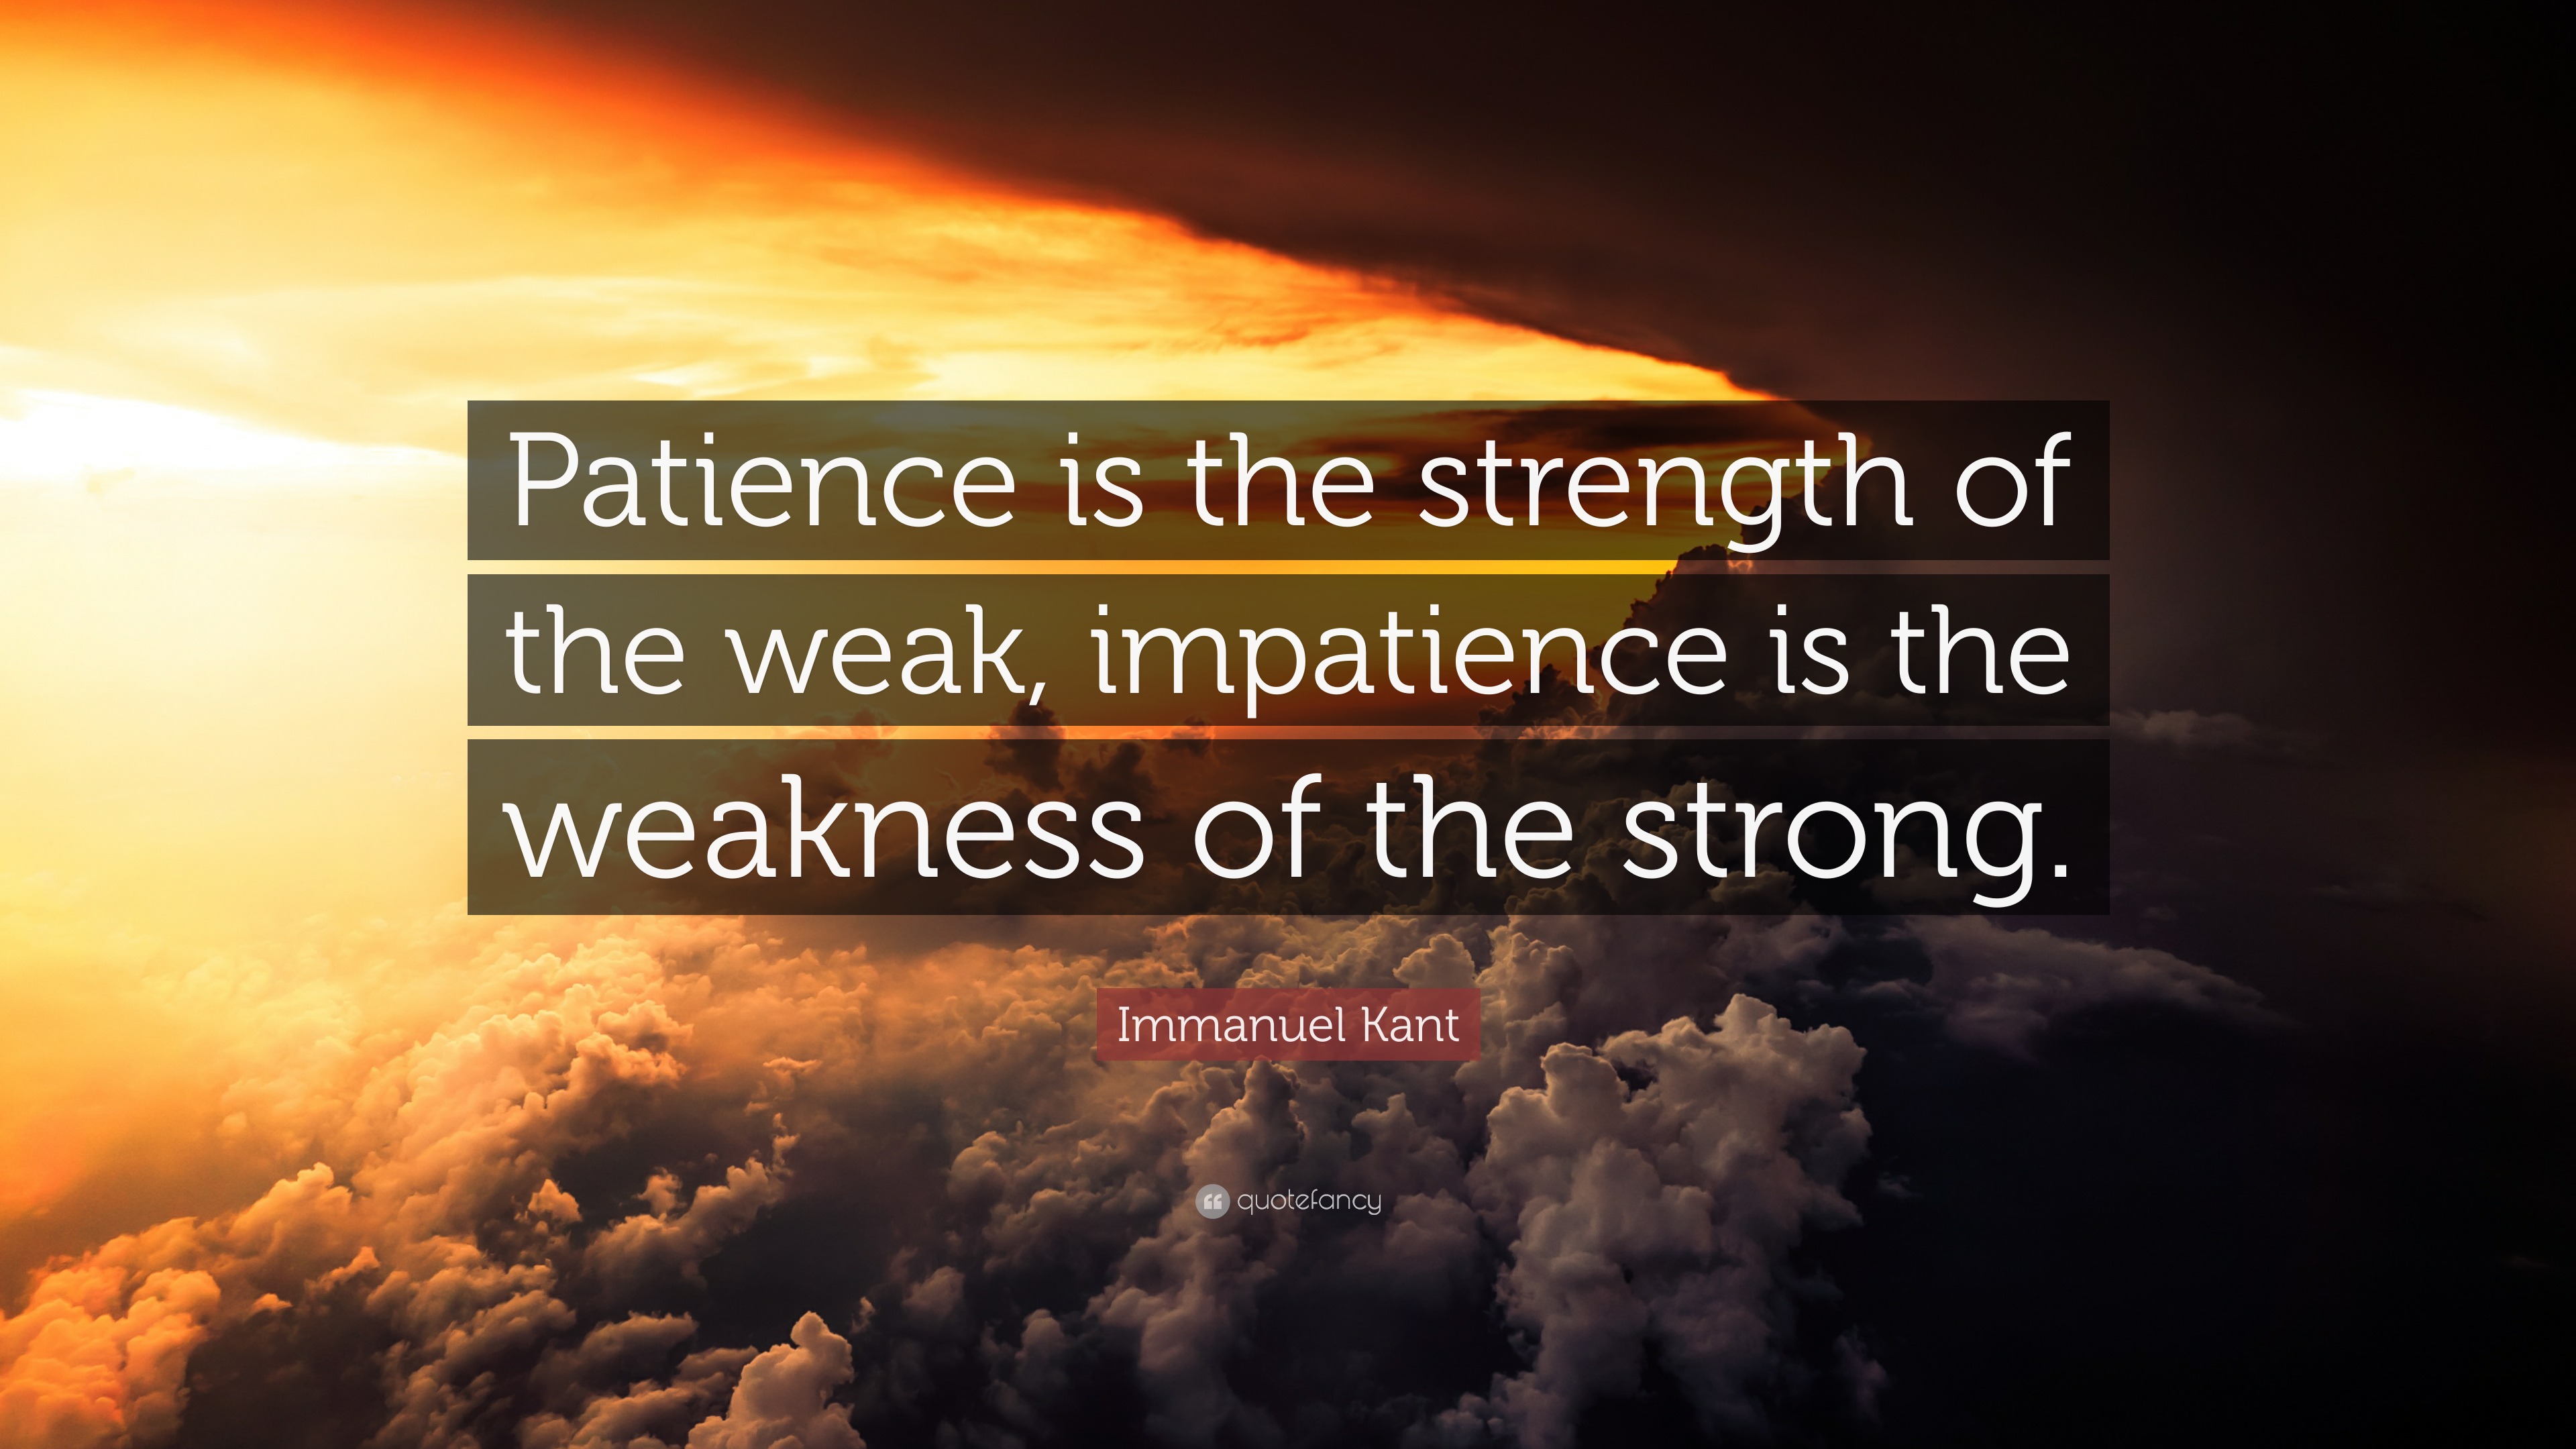 Immanuel Kant Quote: “Patience is the strength of the weak, impatience